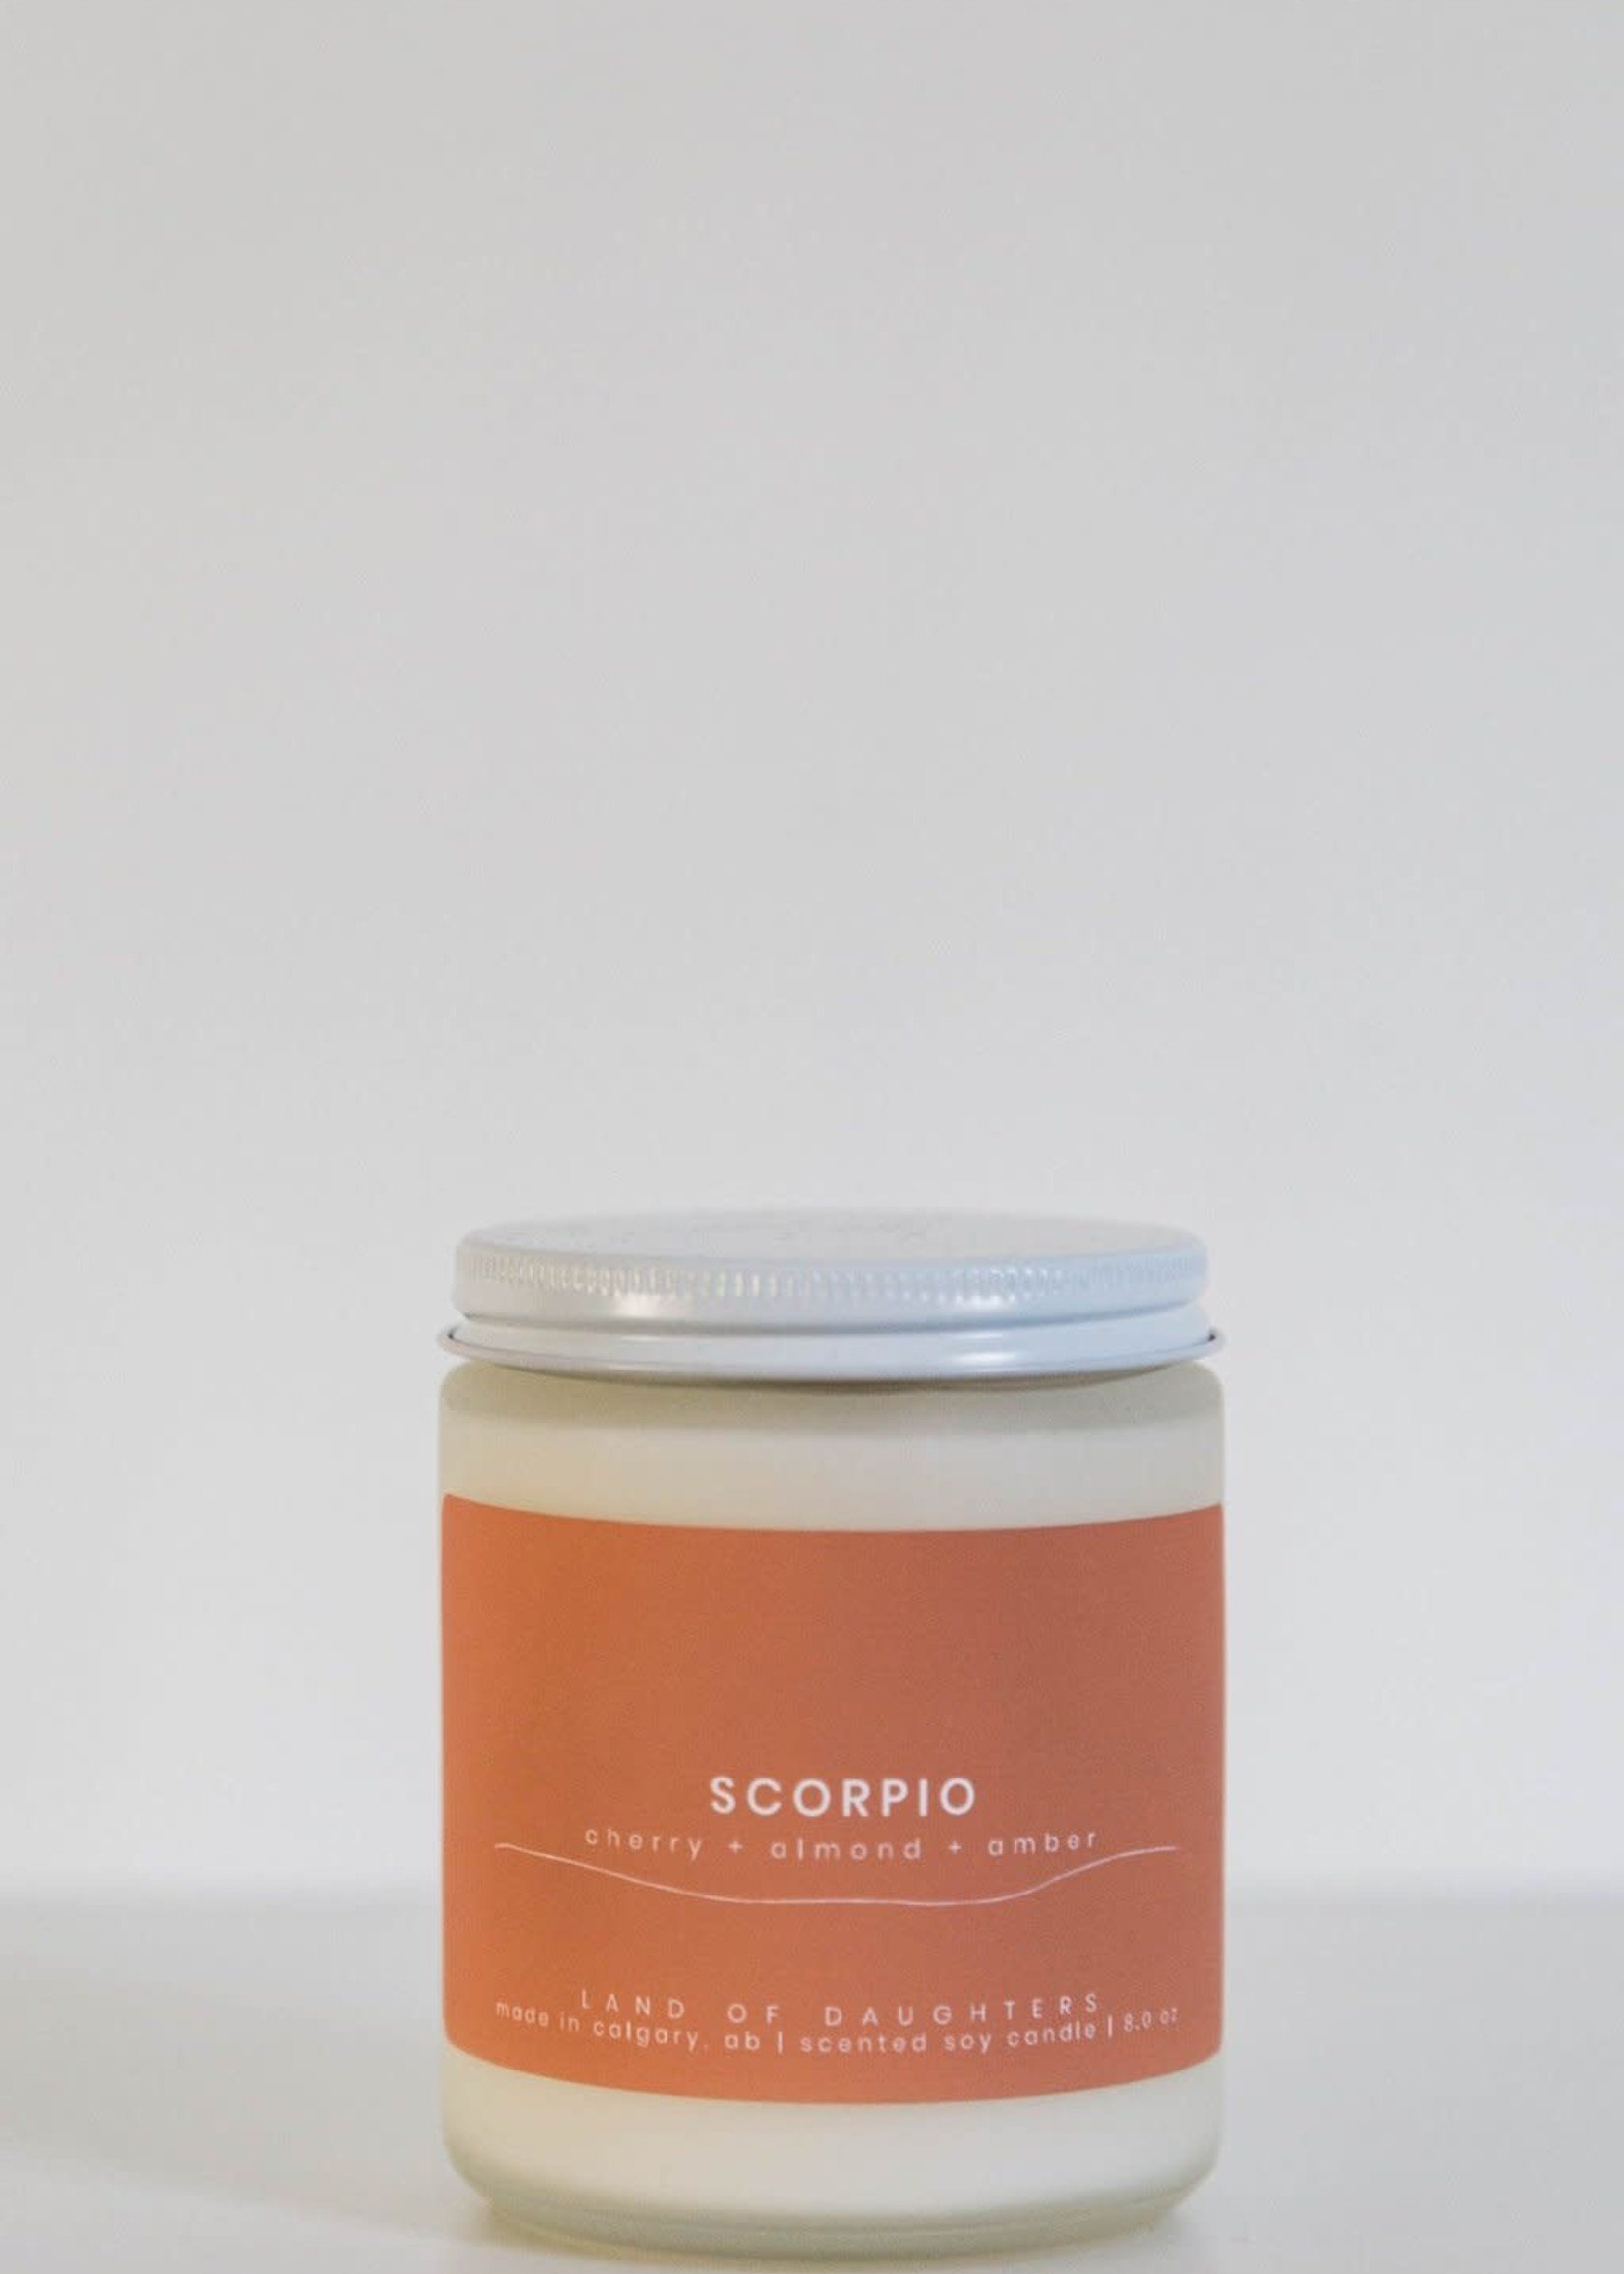 LAND of DAUGHTERS Scorpio CANDLE